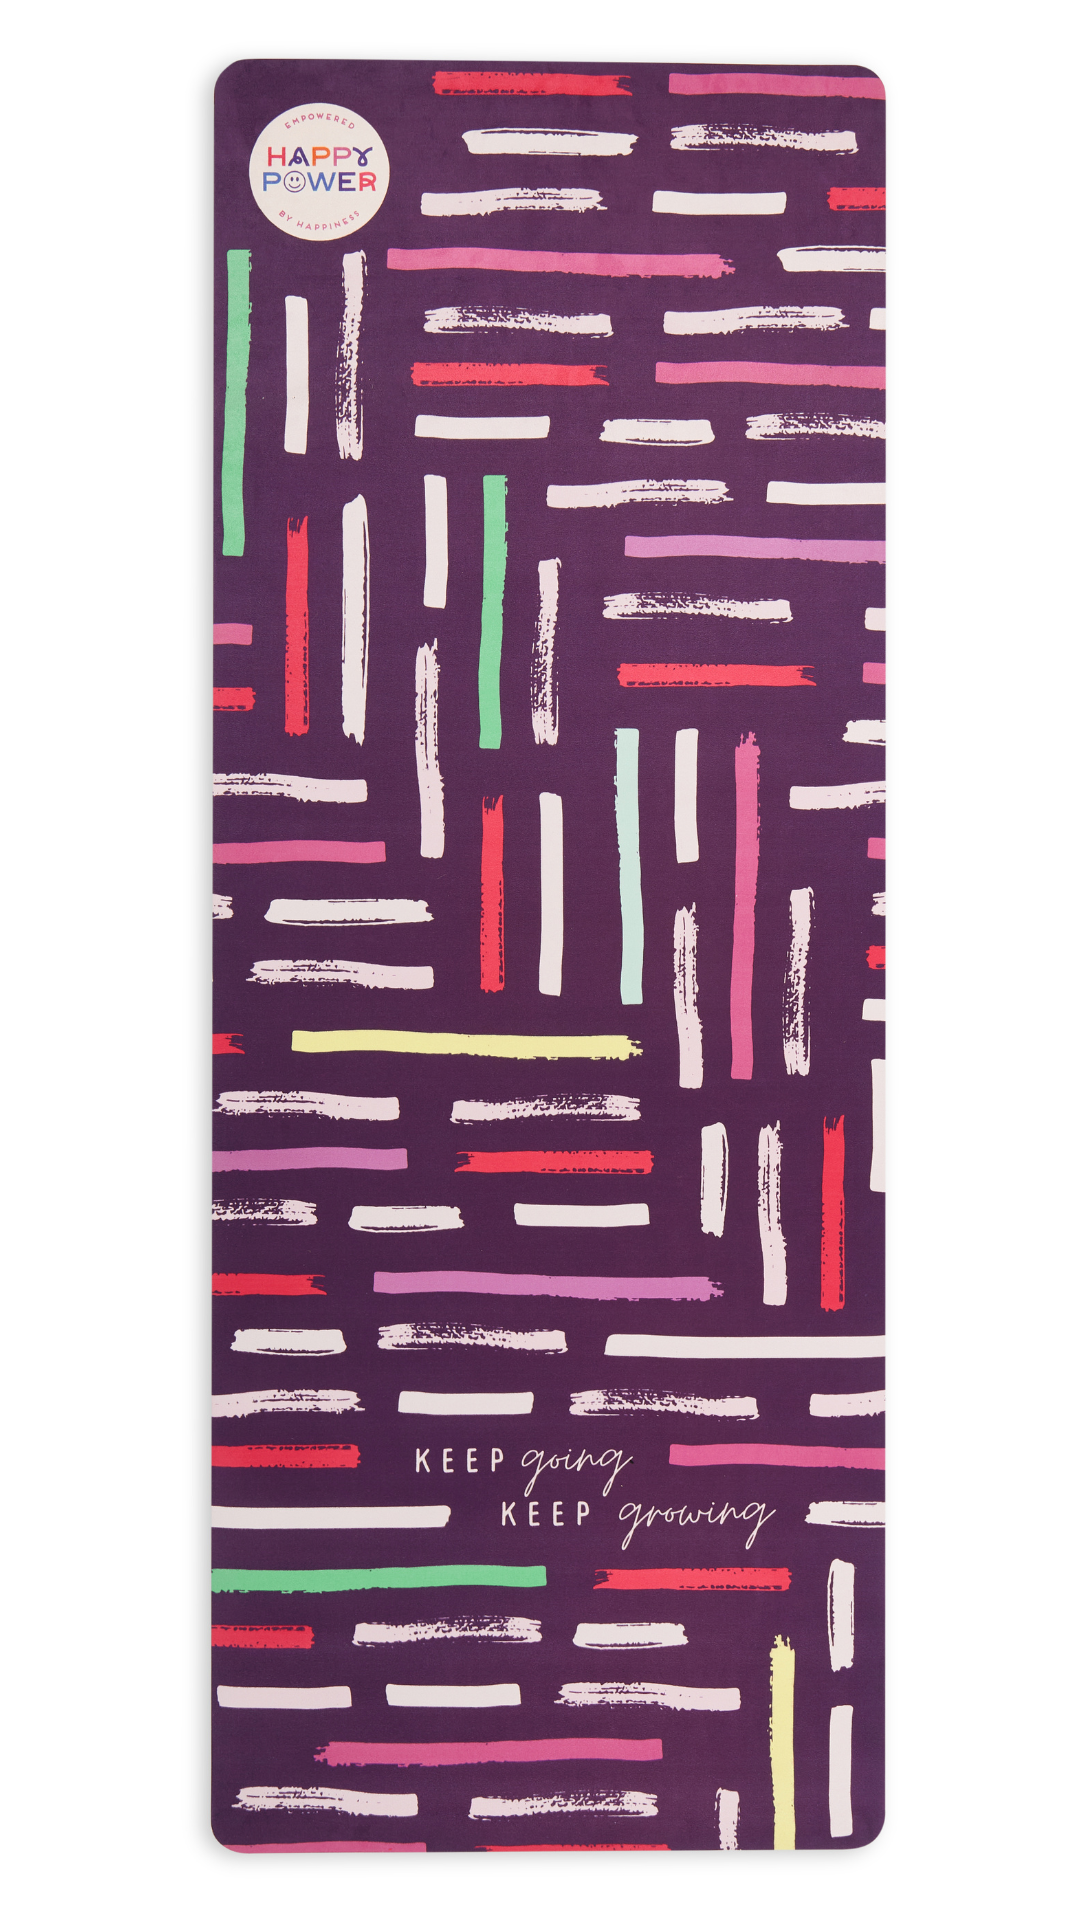 Eco friendly yoga and exercise mat with dark purple mat with scattered coloured stripes. Text reads 'keep going keep growing'.